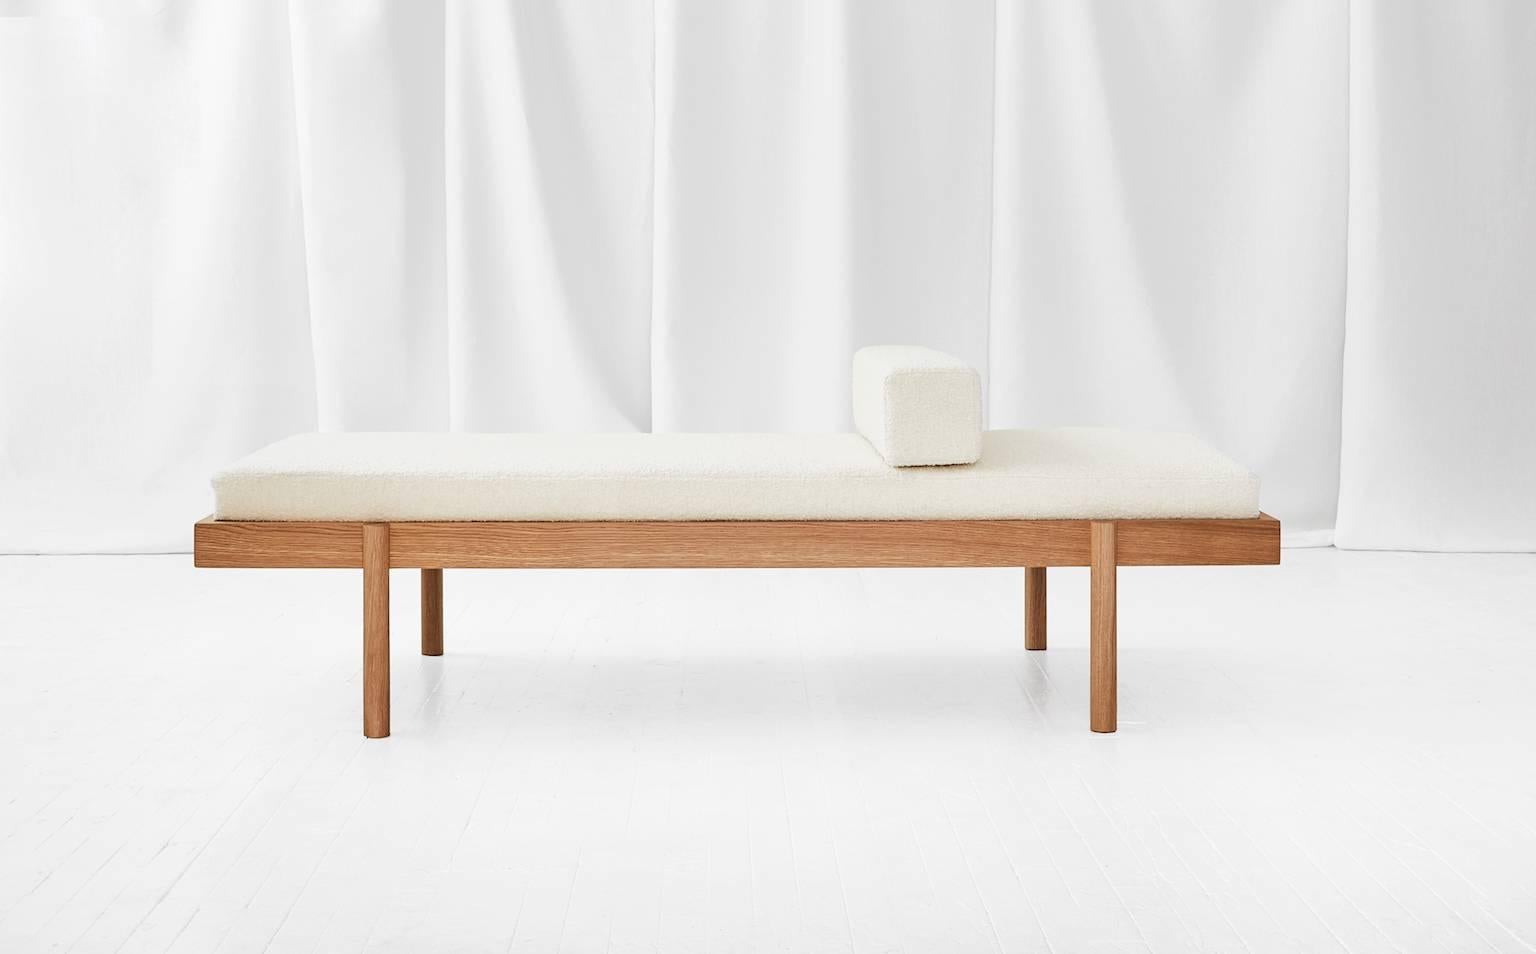 The WC2 daybed from ASH NYC is an exercise in simplicity. The hand-turned legs join seamlessly with the frame to create an elegant, handcrafted joint that defies gravity.

The form takes reference from the great French designs of the 1950s,